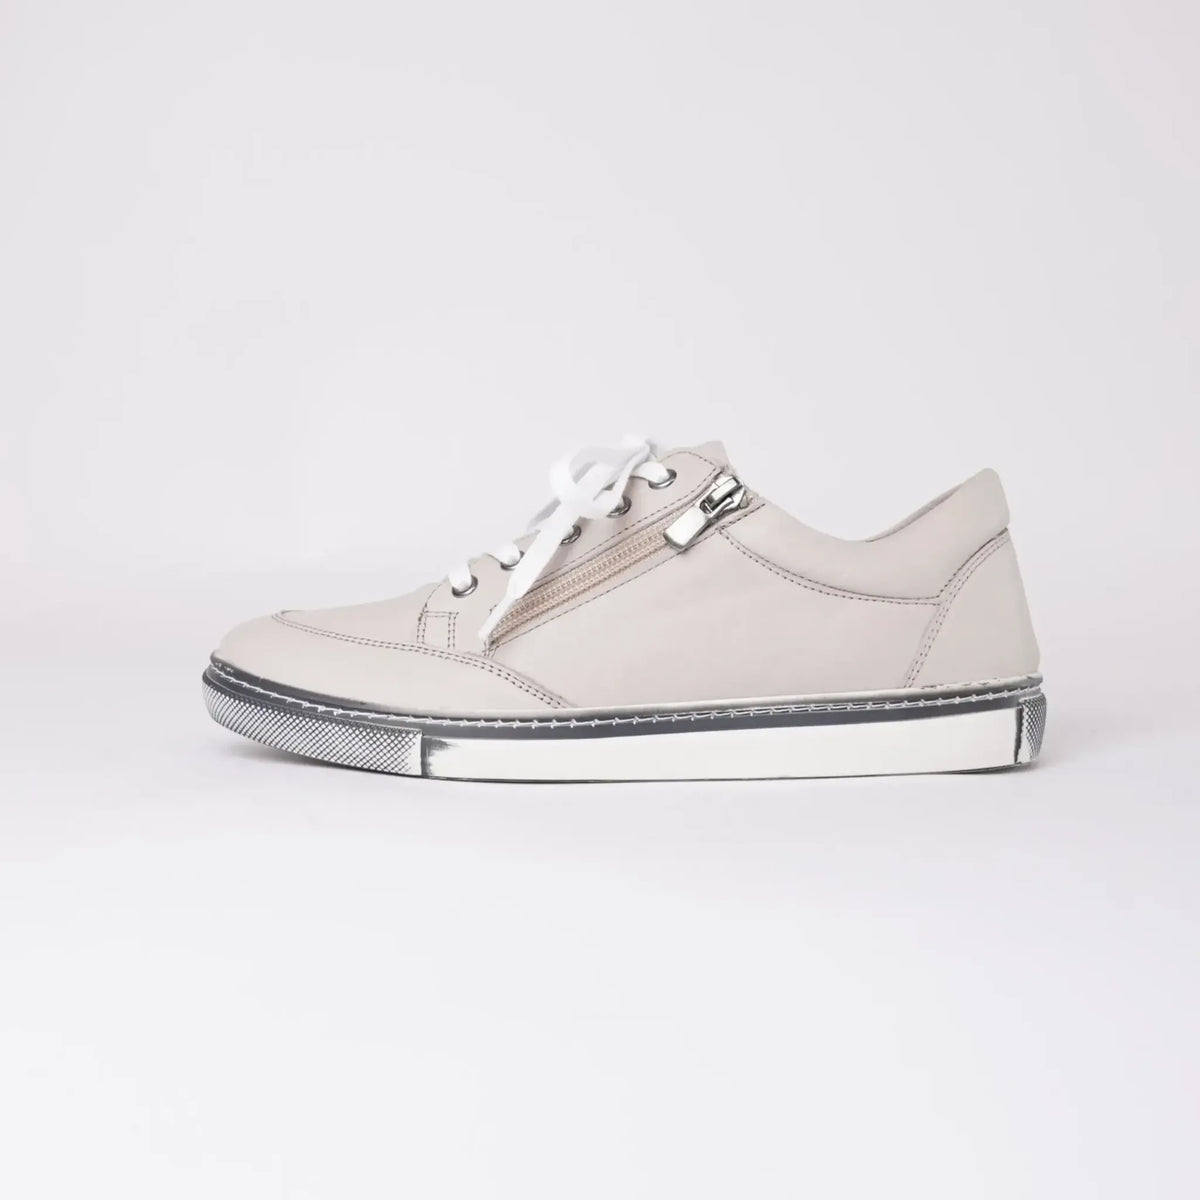 Ronnie Silver Grey Leather Sneakers